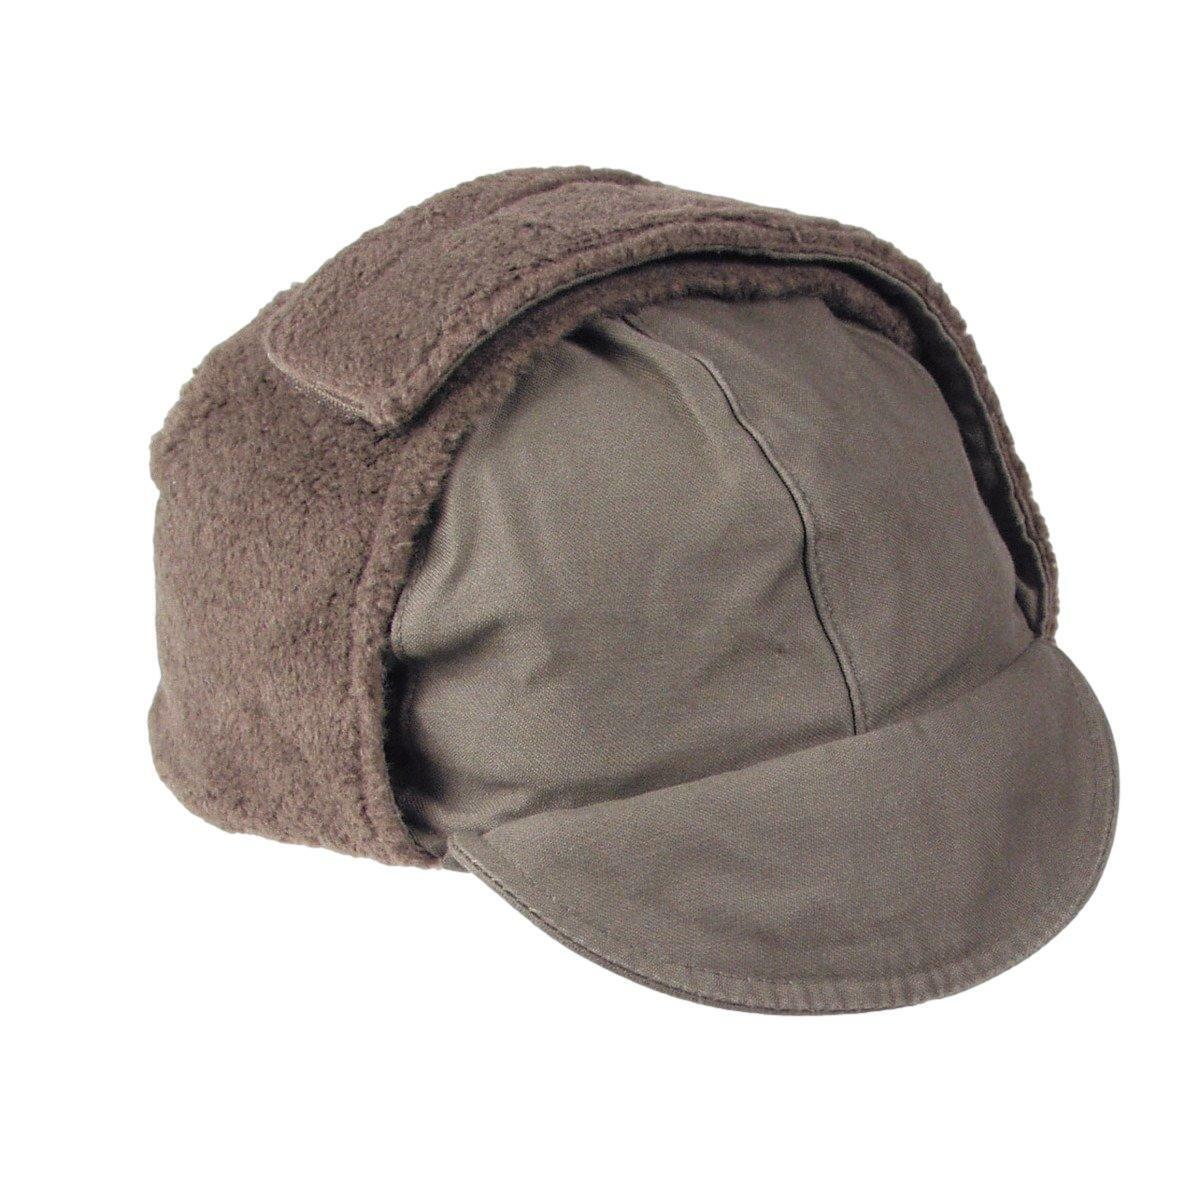 GERMAN MILITARY ARMY OD GREEN COLD WEATHER WINTER CAP/HAT EAR